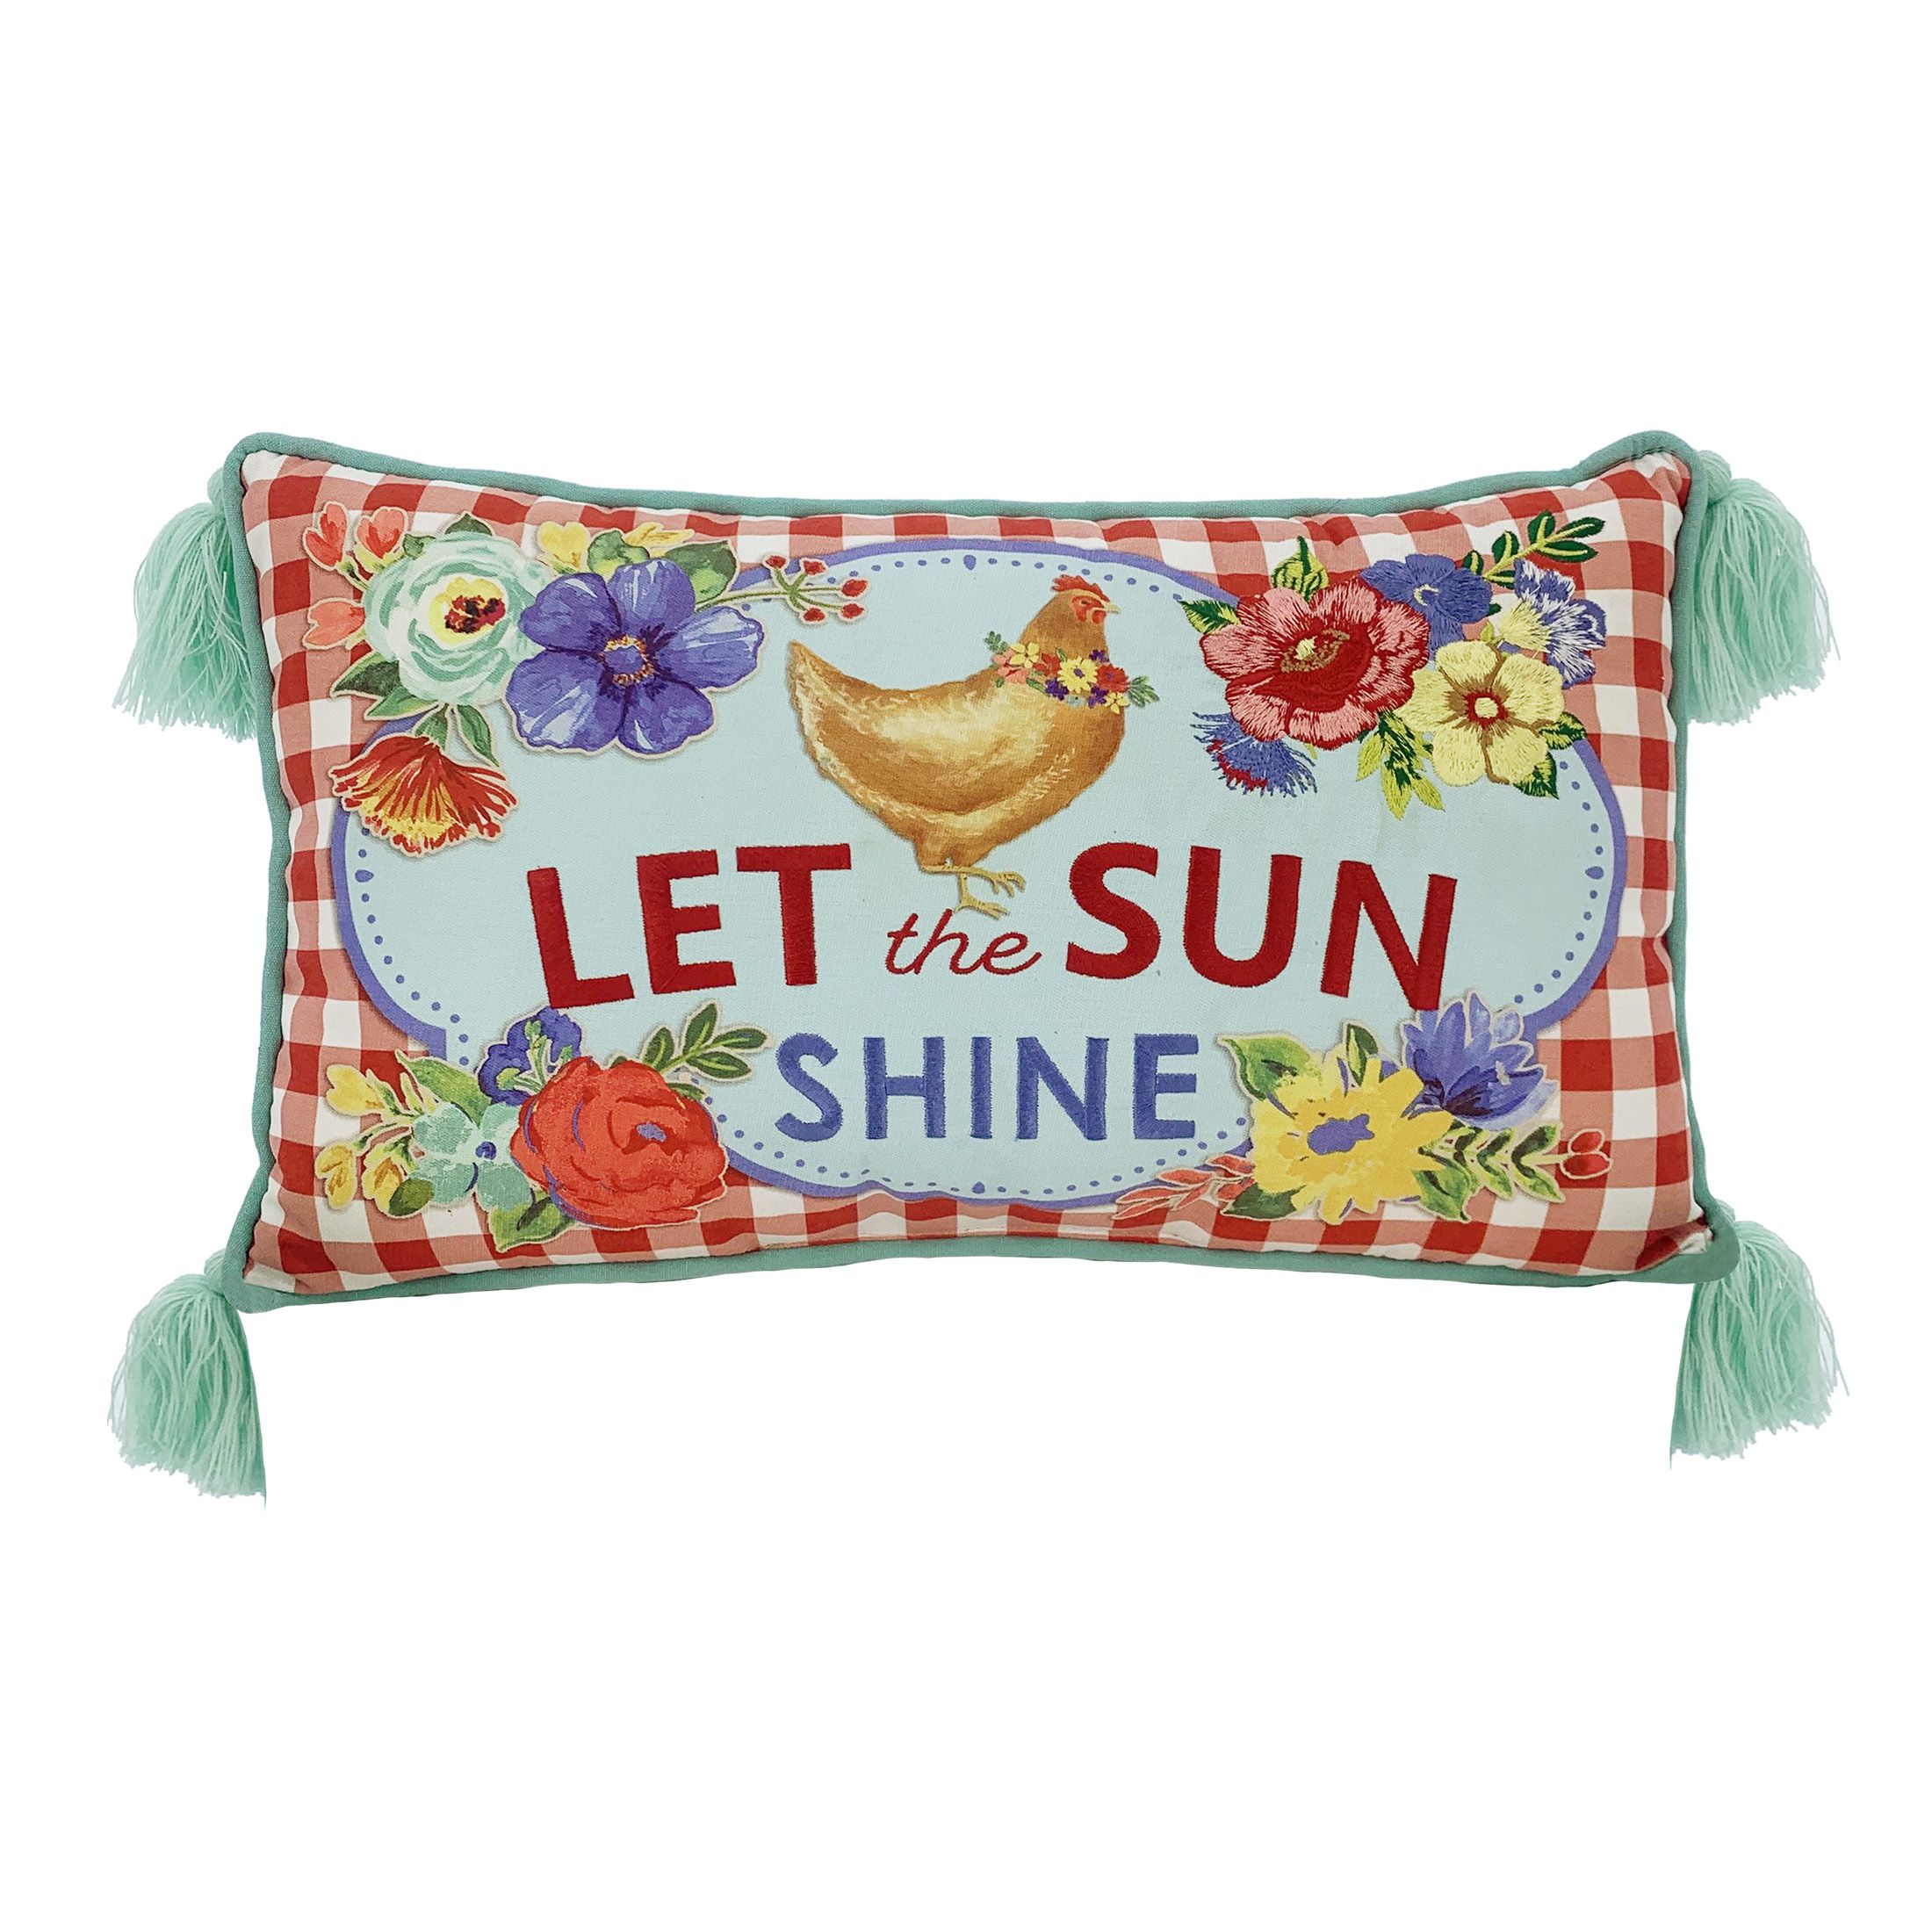 The Pioneer Woman 'Let the Sun Shine' Decorative Throw Pillow